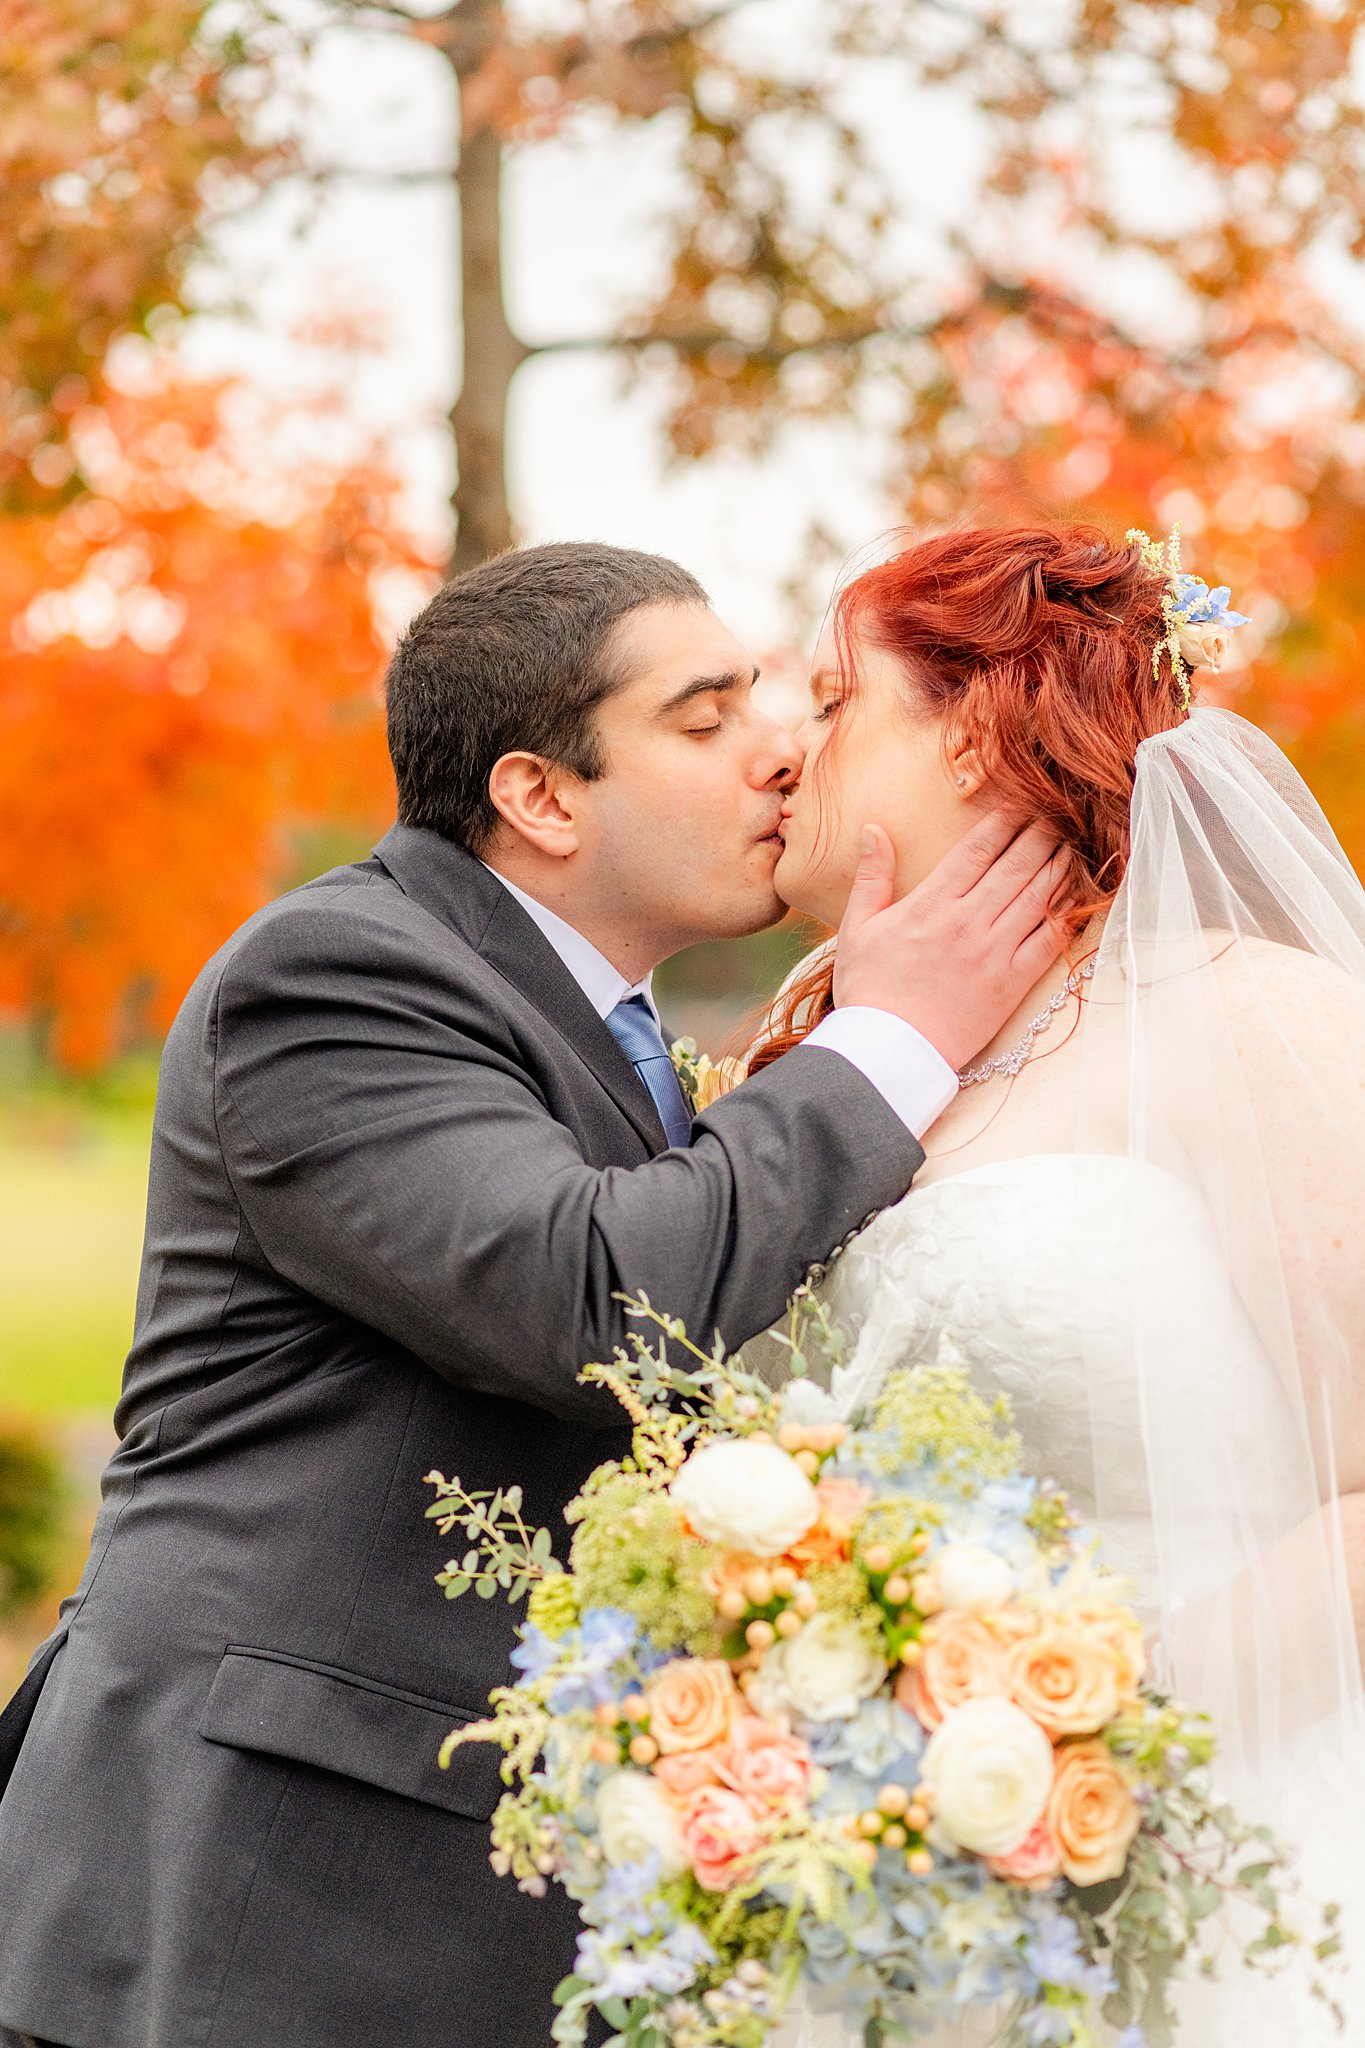 Newlyweds kiss in a park with fall colored trees and a large bouquet